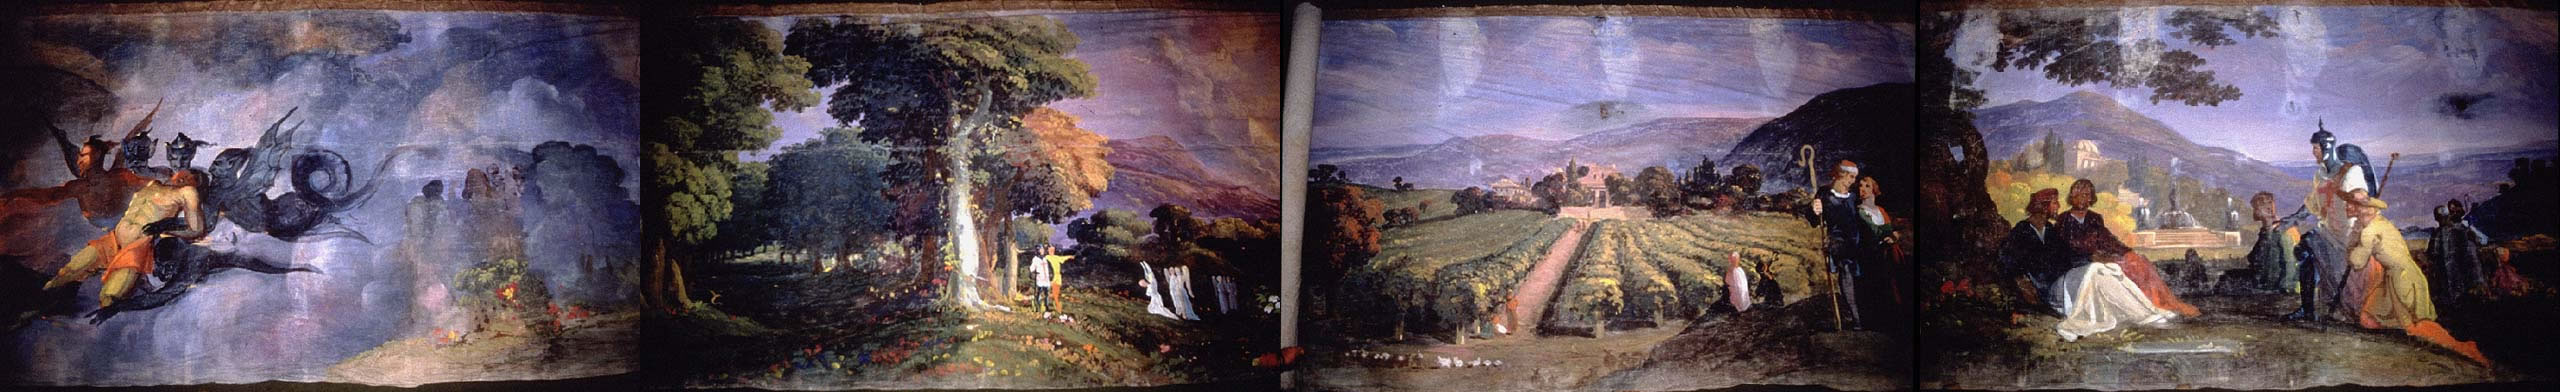 Four Individually Painted Scenes, Joined, From 'The Grand Moving Panorama of John Bunyan's Pilgrim's Progress'